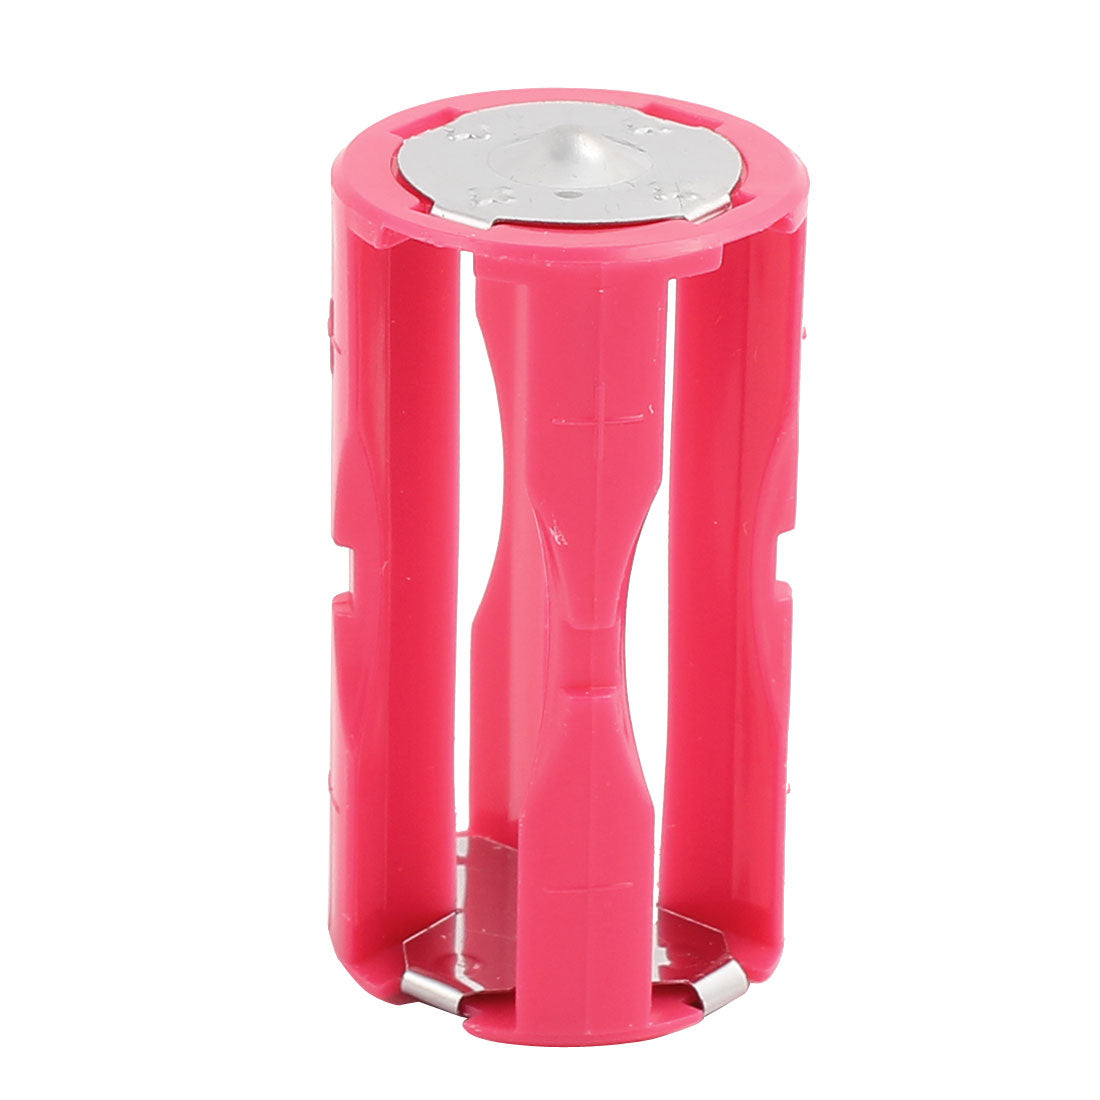 uxcell Uxcell Round Plastic Battery Holder Case Box Rose Red for 4 x 1.5V AAA Battery